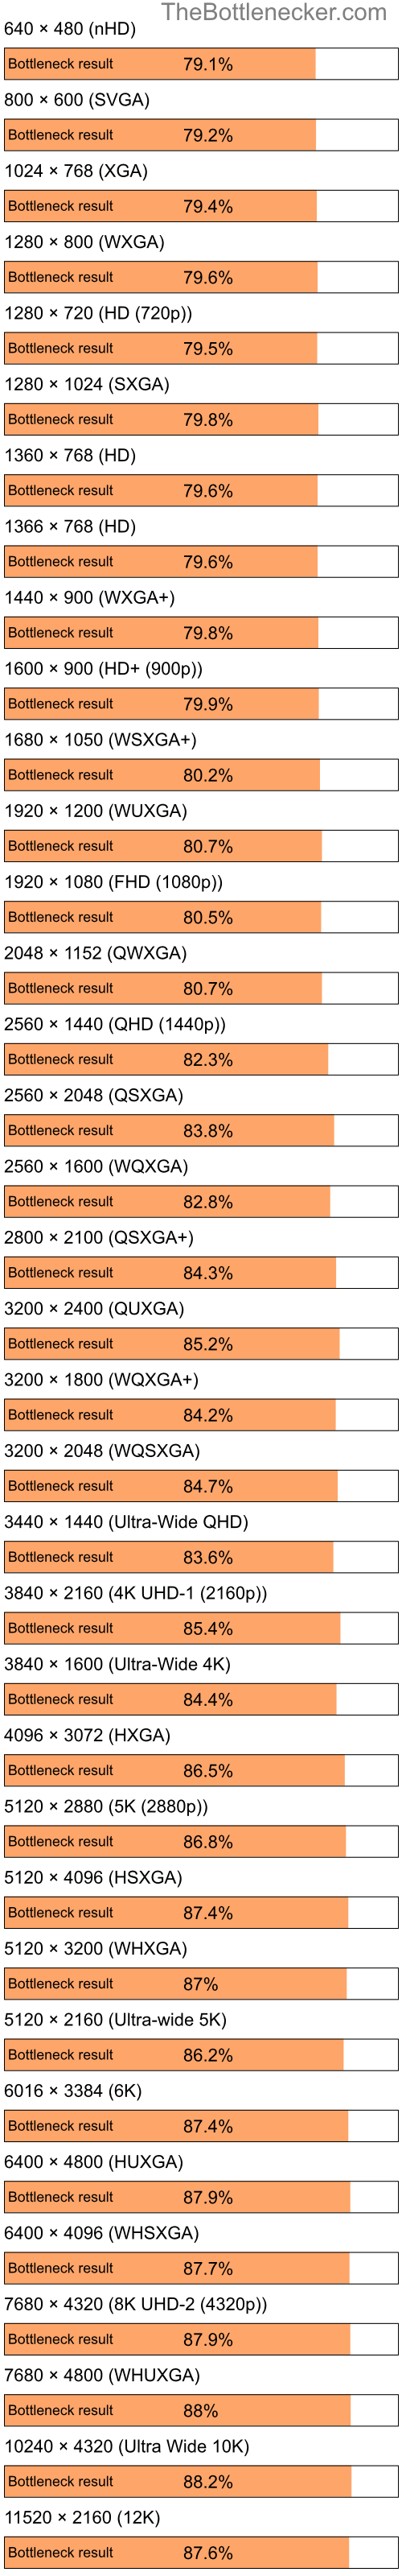 Bottleneck results by resolution for Intel Celeron M and AMD Mobility Radeon X1400 in Graphic Card Intense Tasks